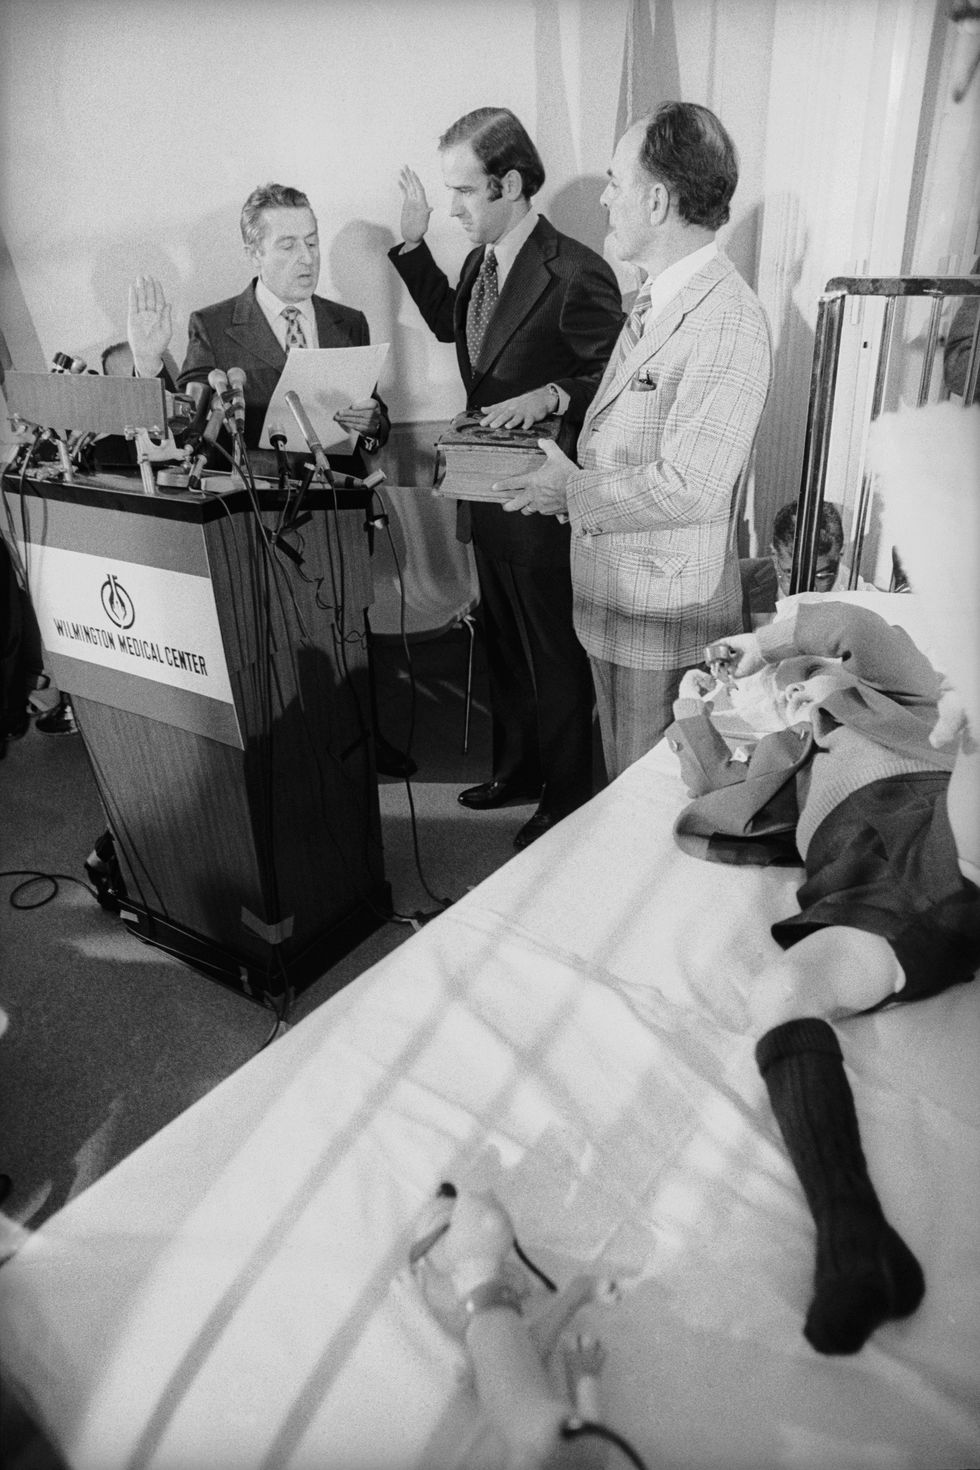 Joe Biden takes the oath of office from U.S. Senate secretary Frank Valeo with his father-in-law, Robert Hunter, and son Beau at his side, in Beau's hospital room